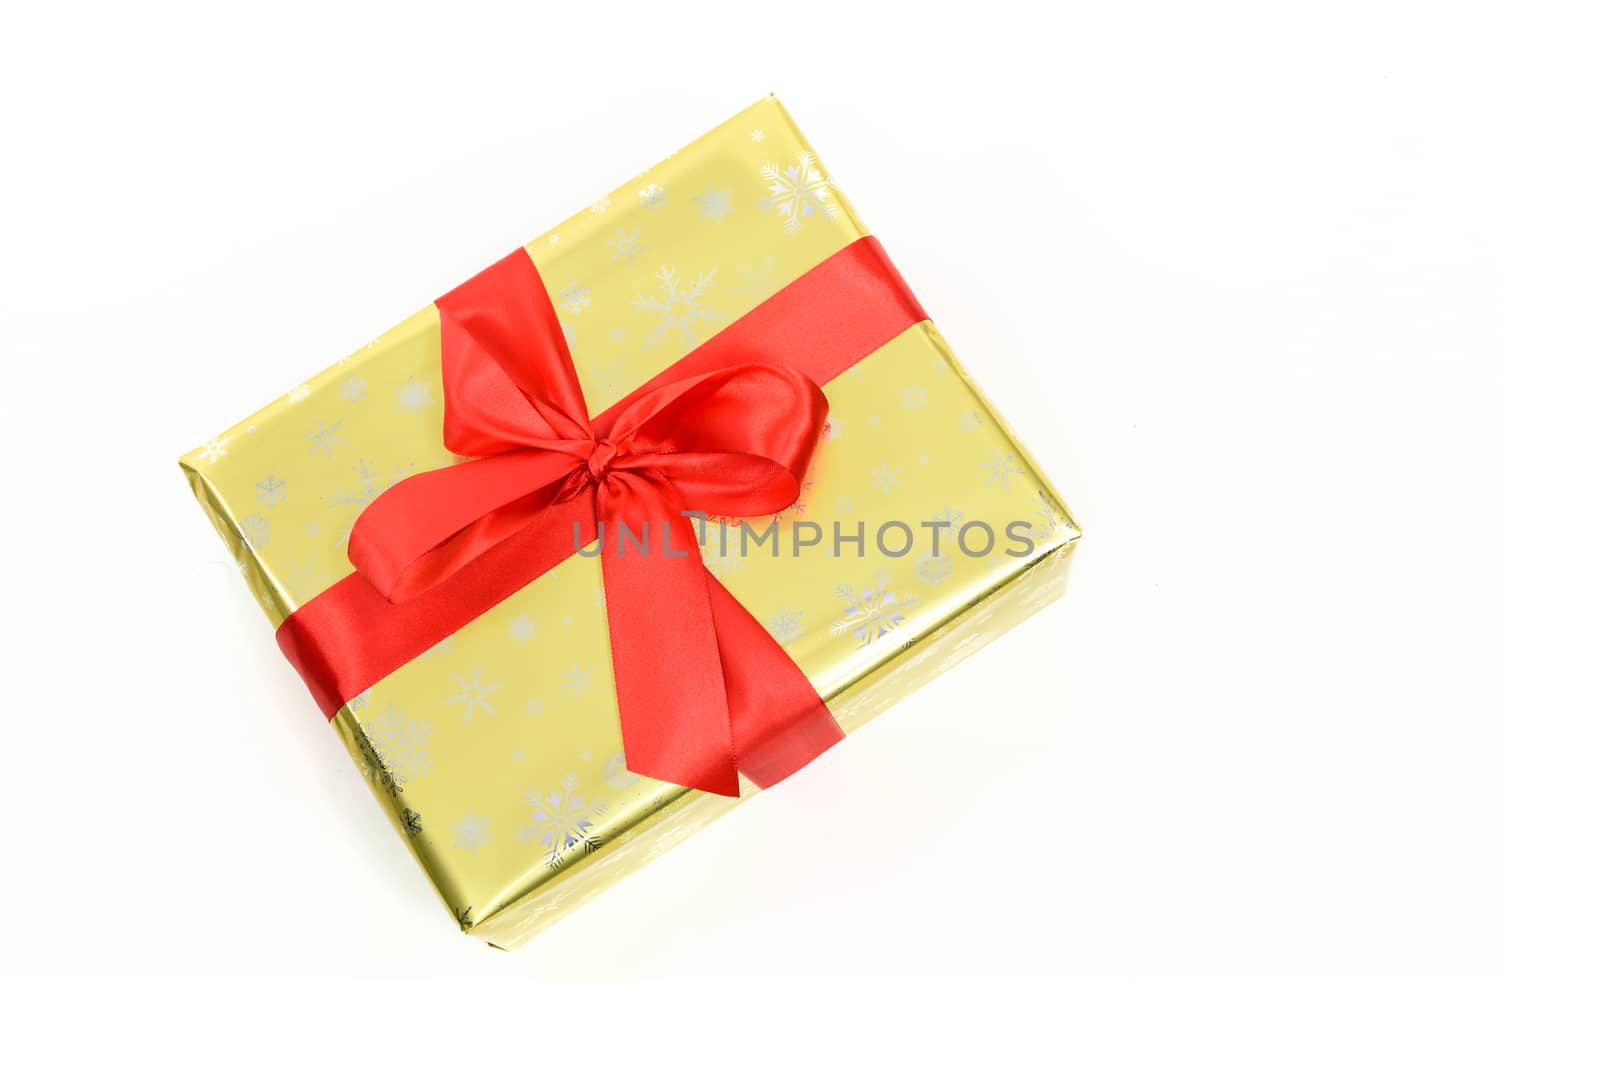 Concept of luxury Christmas gift - a box packed in a golden paper and tied with a red satin ribbon on a white background